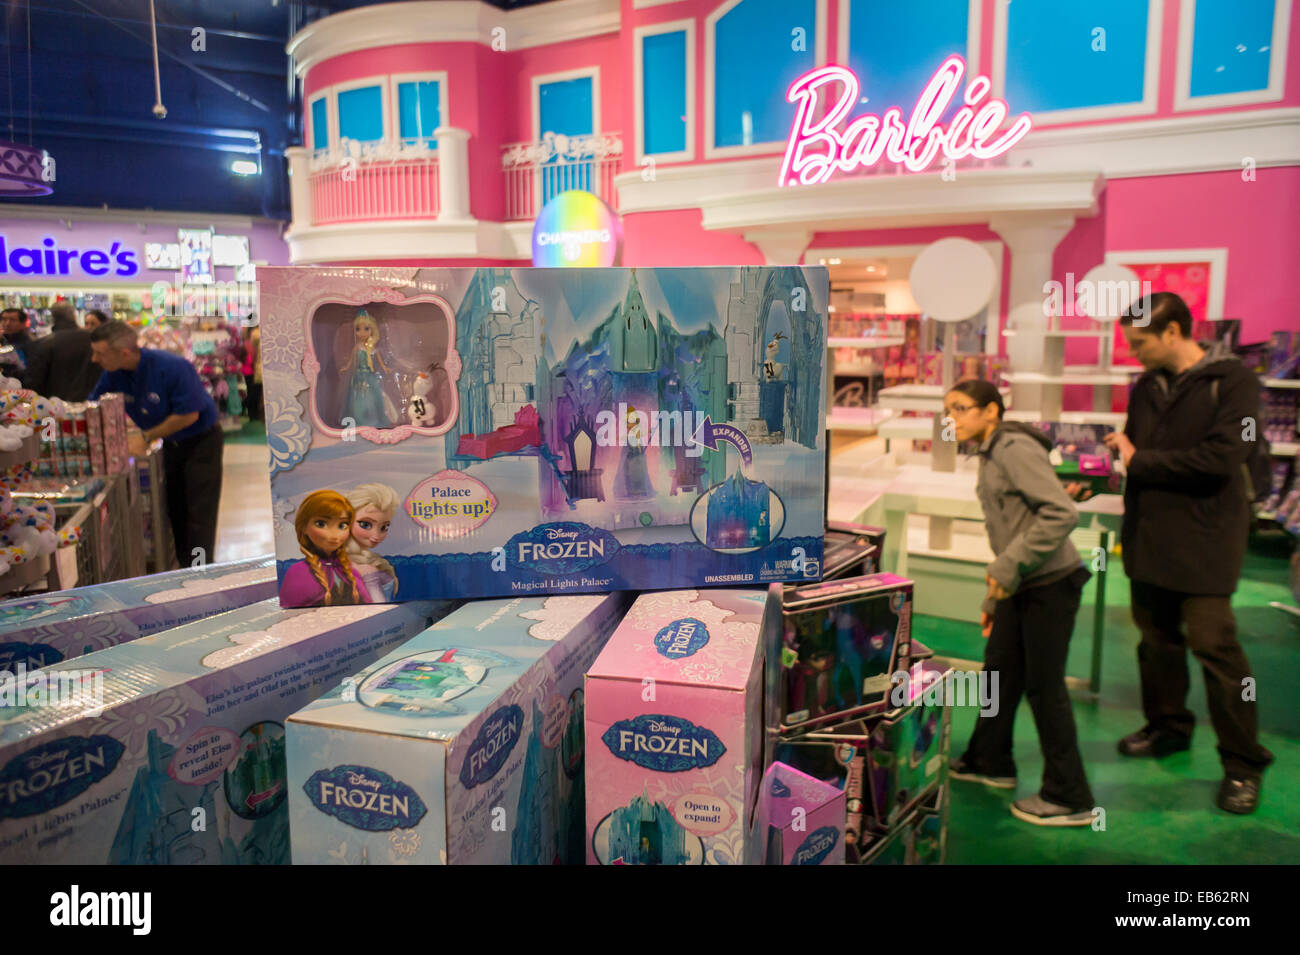 Disney's Frozen merchandise is seen in front of the Barbie display at Toys R Us in Times Square in New York Stock Photo